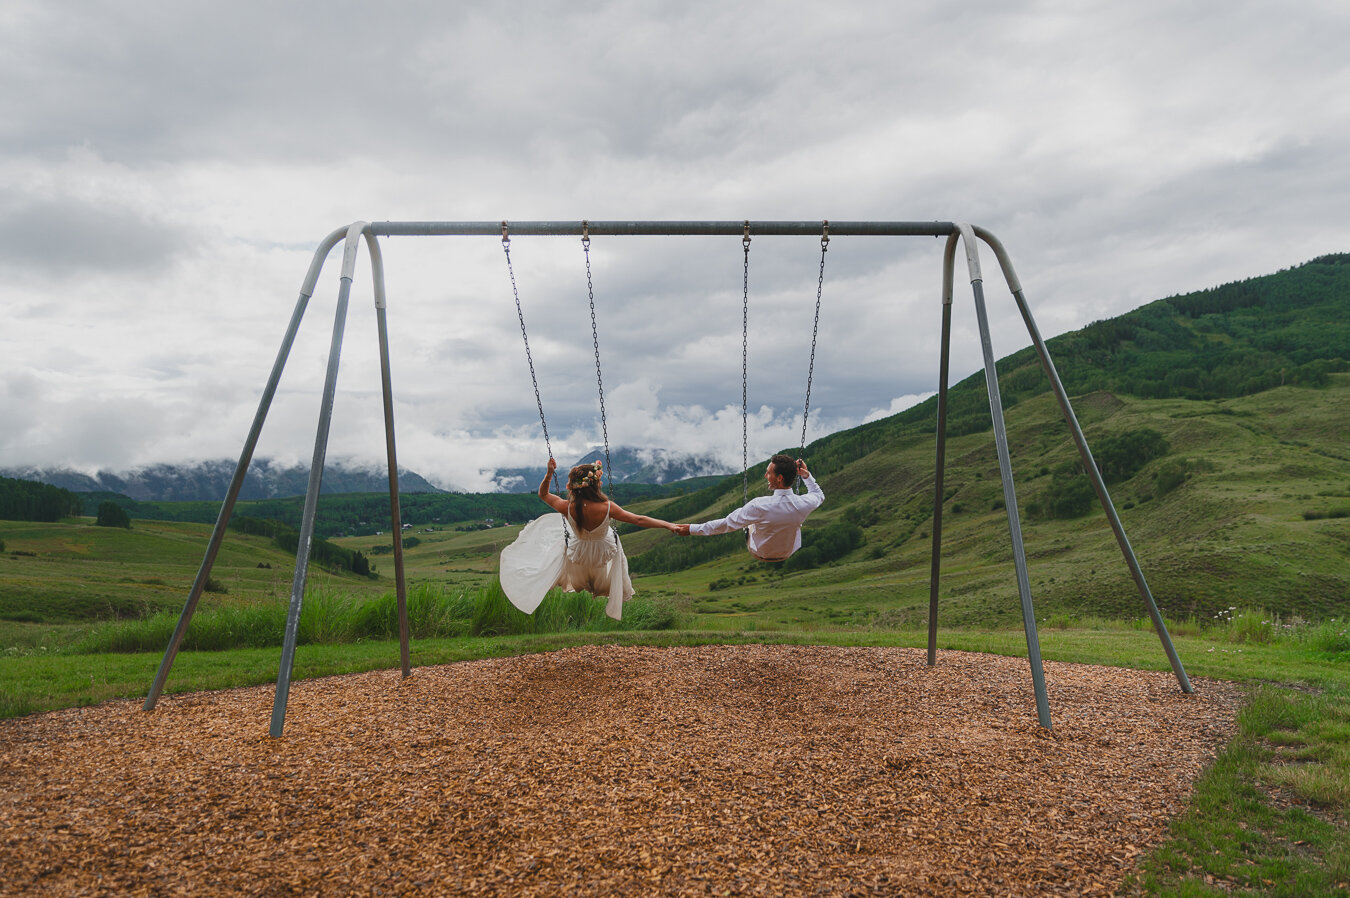 Name one thing cuter than swinging on a swingset with your spouse on your wedding day ... I'll wait.

Venue: @mountainweddinggarden 
Planner: @luckypennyevents 
DJ: @shavanosoundz 
Florist: @finallyfloral 
Food: @sherpacafe 
Bar: @sidecarmobilebar 
.